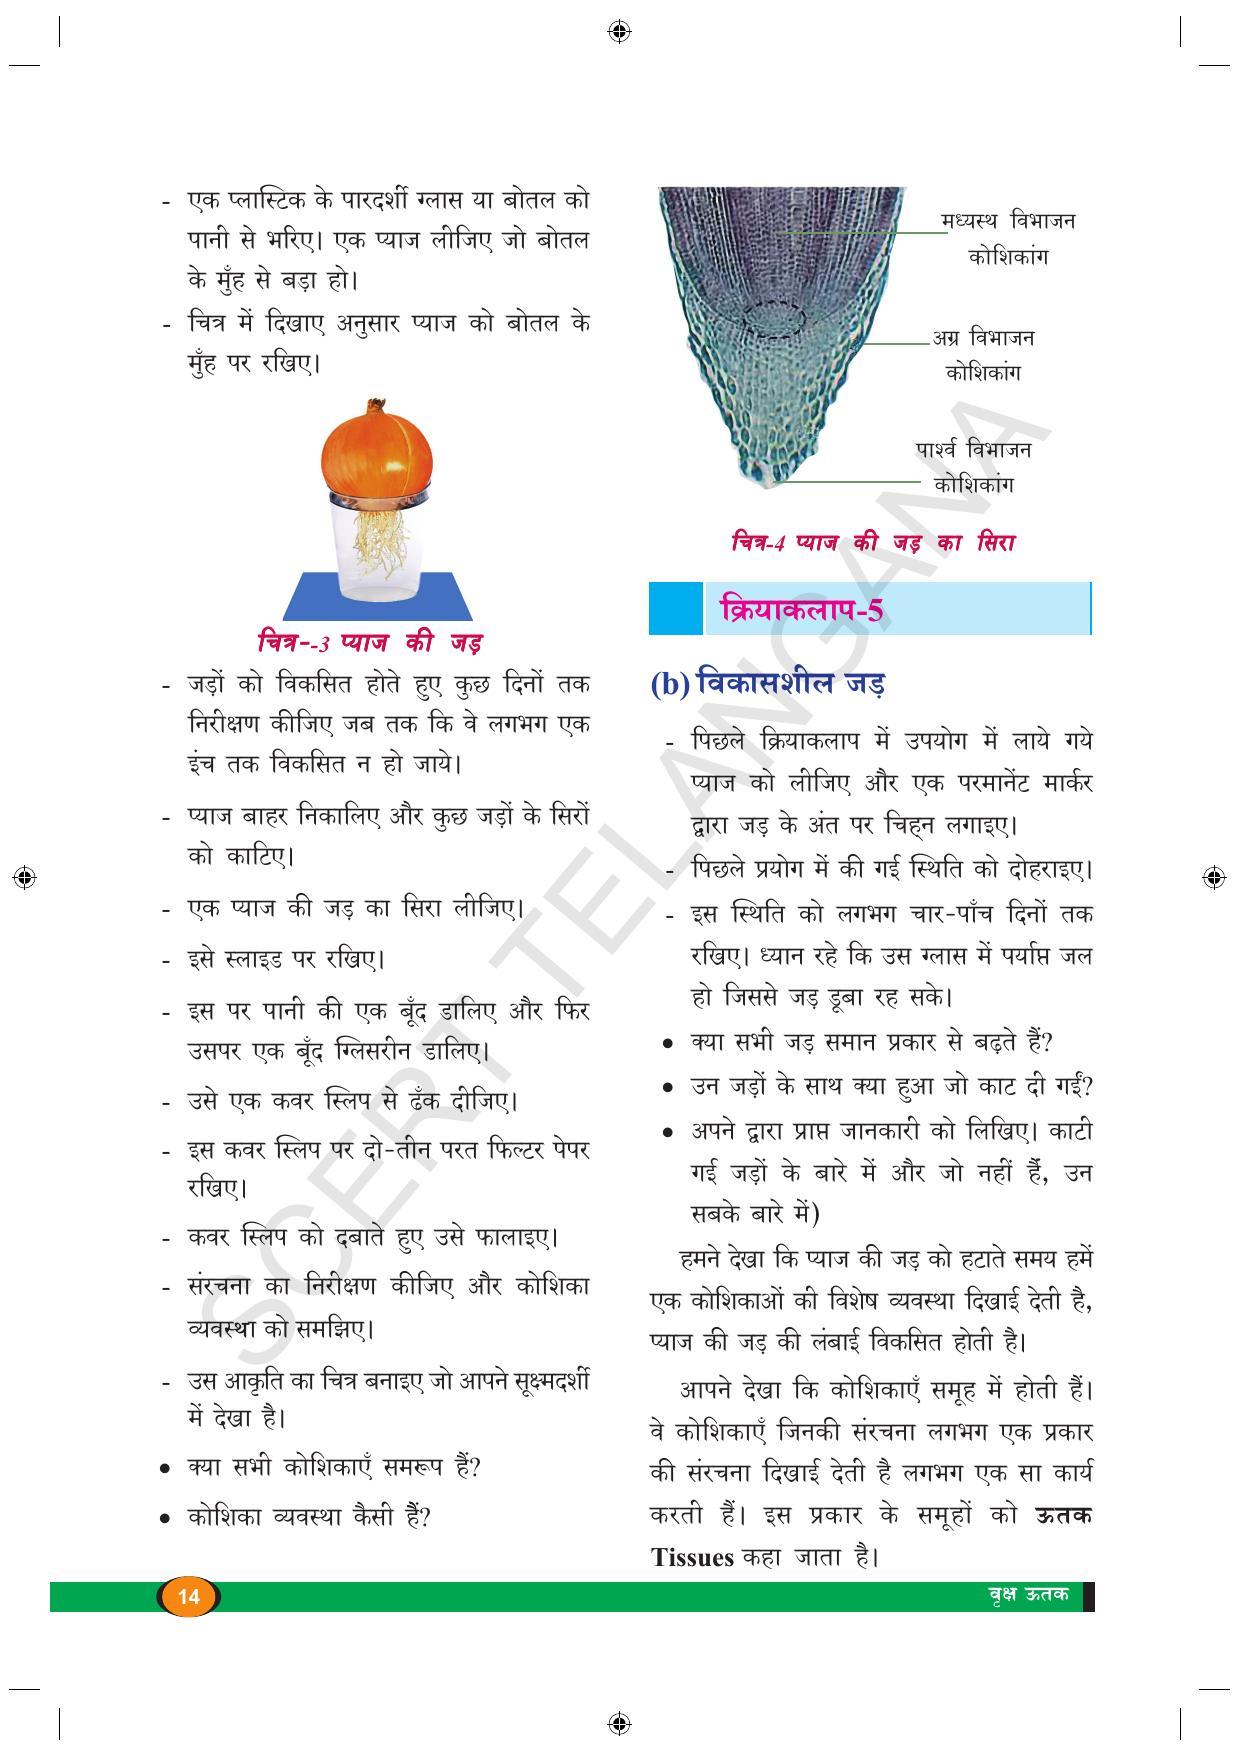 TS SCERT Class 9 Biological Science (Hindi Medium) Text Book - Page 26